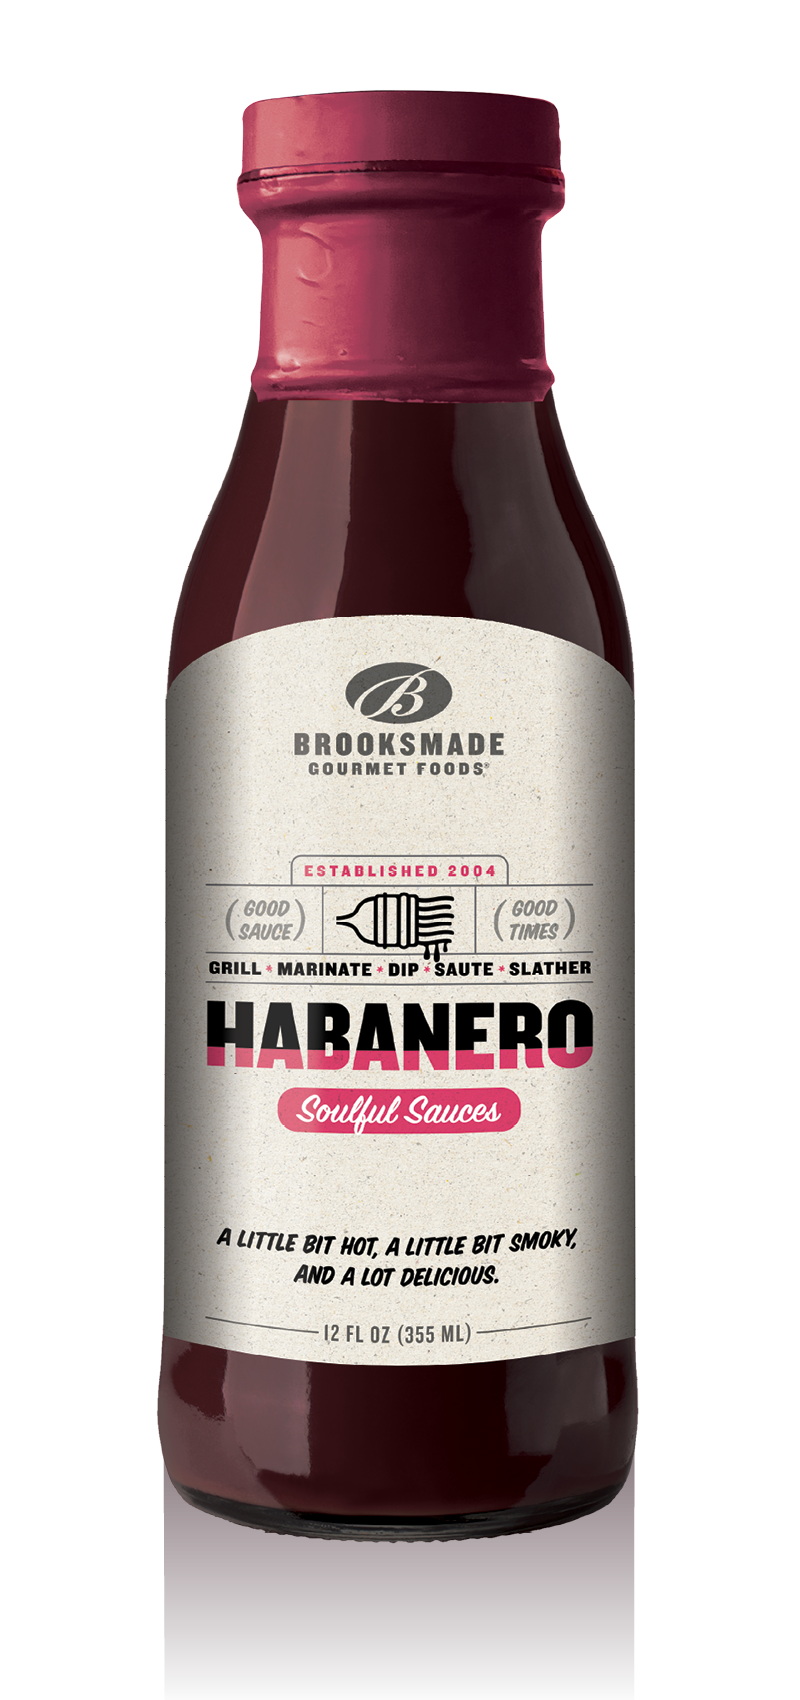 Habanero BBQ Sauce & Marinade Soulful Sauces, Gluten Free, No High Fructose Corn Syrup All-Natural 12 oz Unit